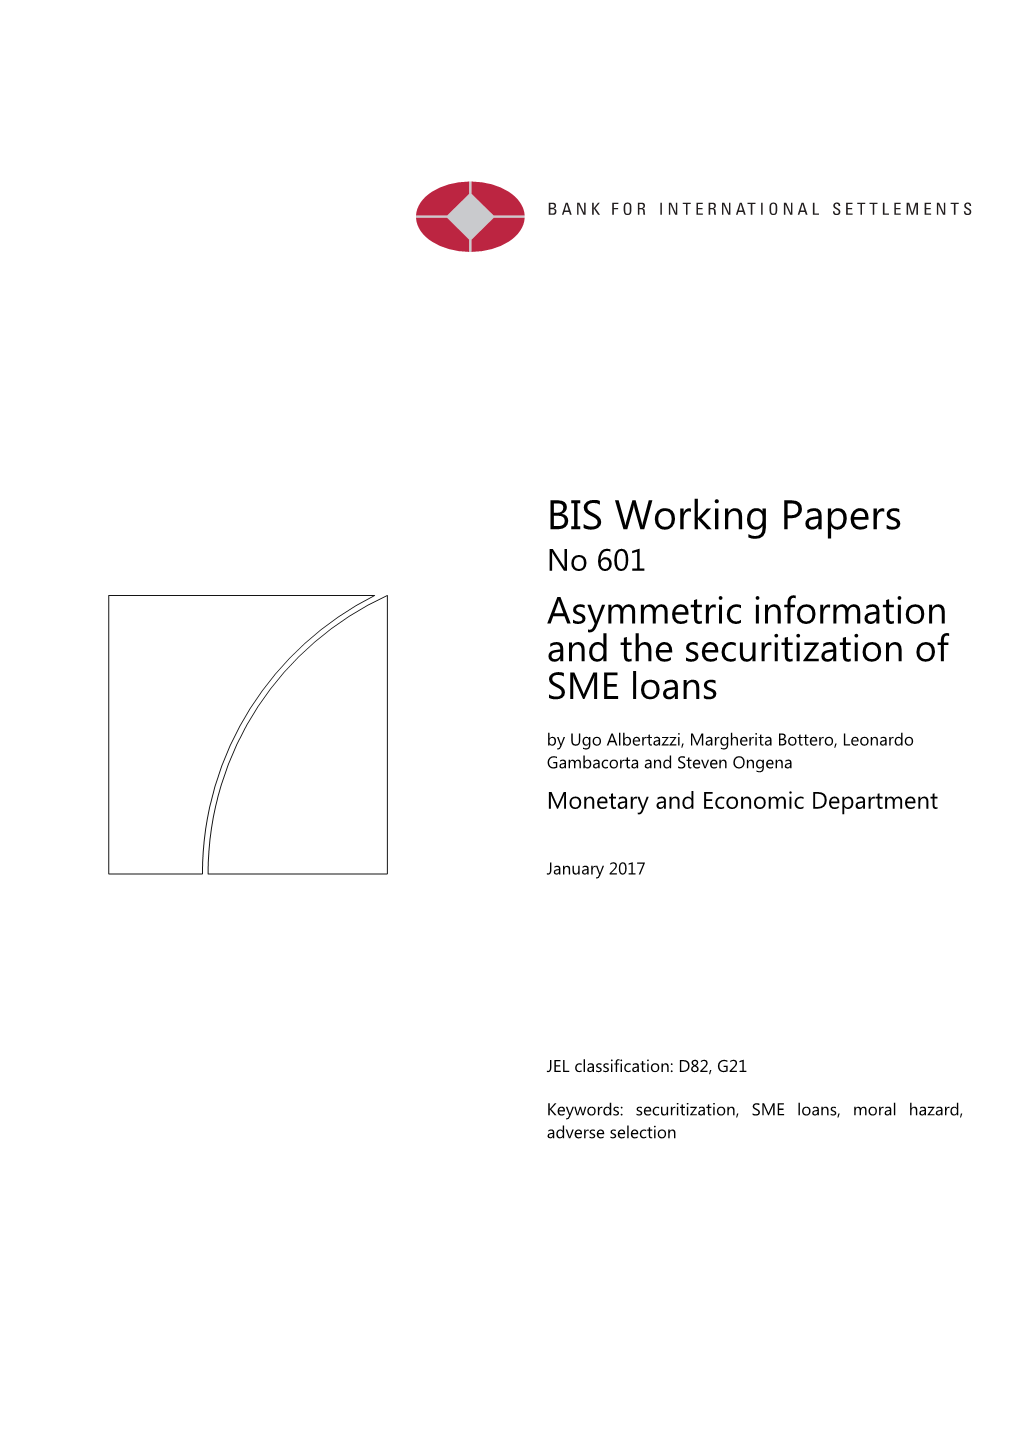 BIS Working Papers No 601 Asymmetric Information and the Securitization of SME Loans